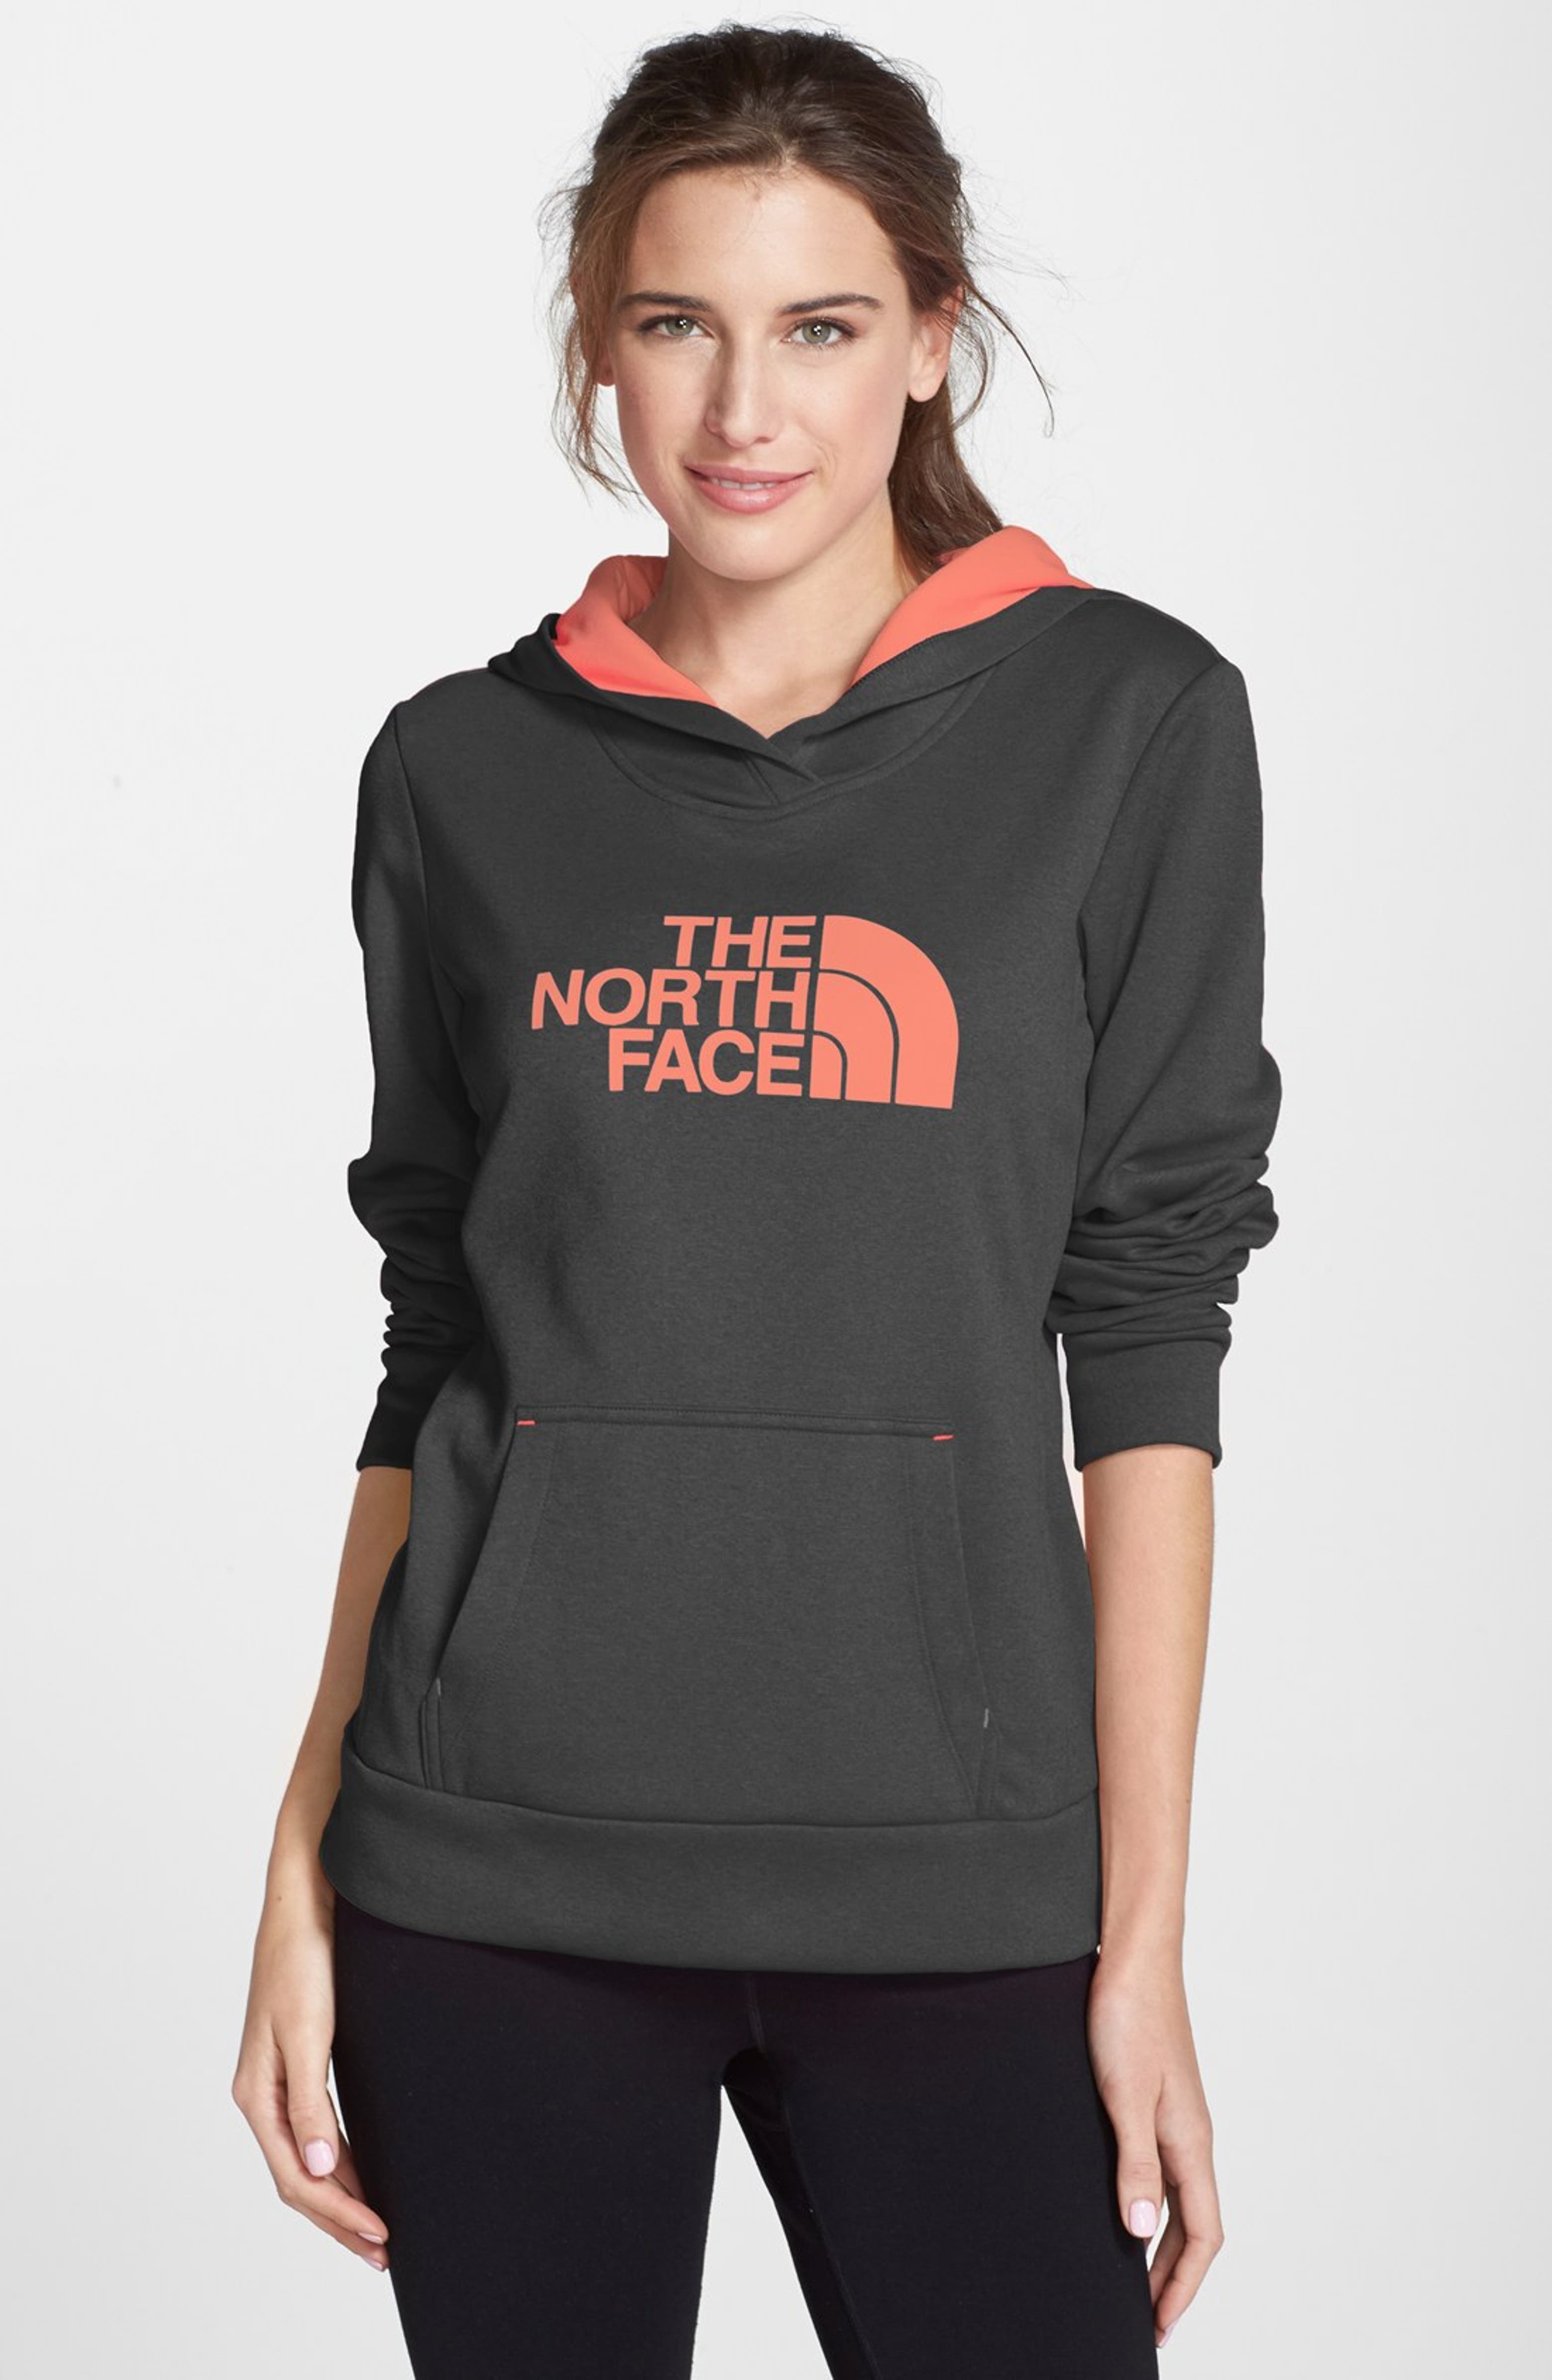 The North Face 'Fave' Logo Hoodie | Nordstrom